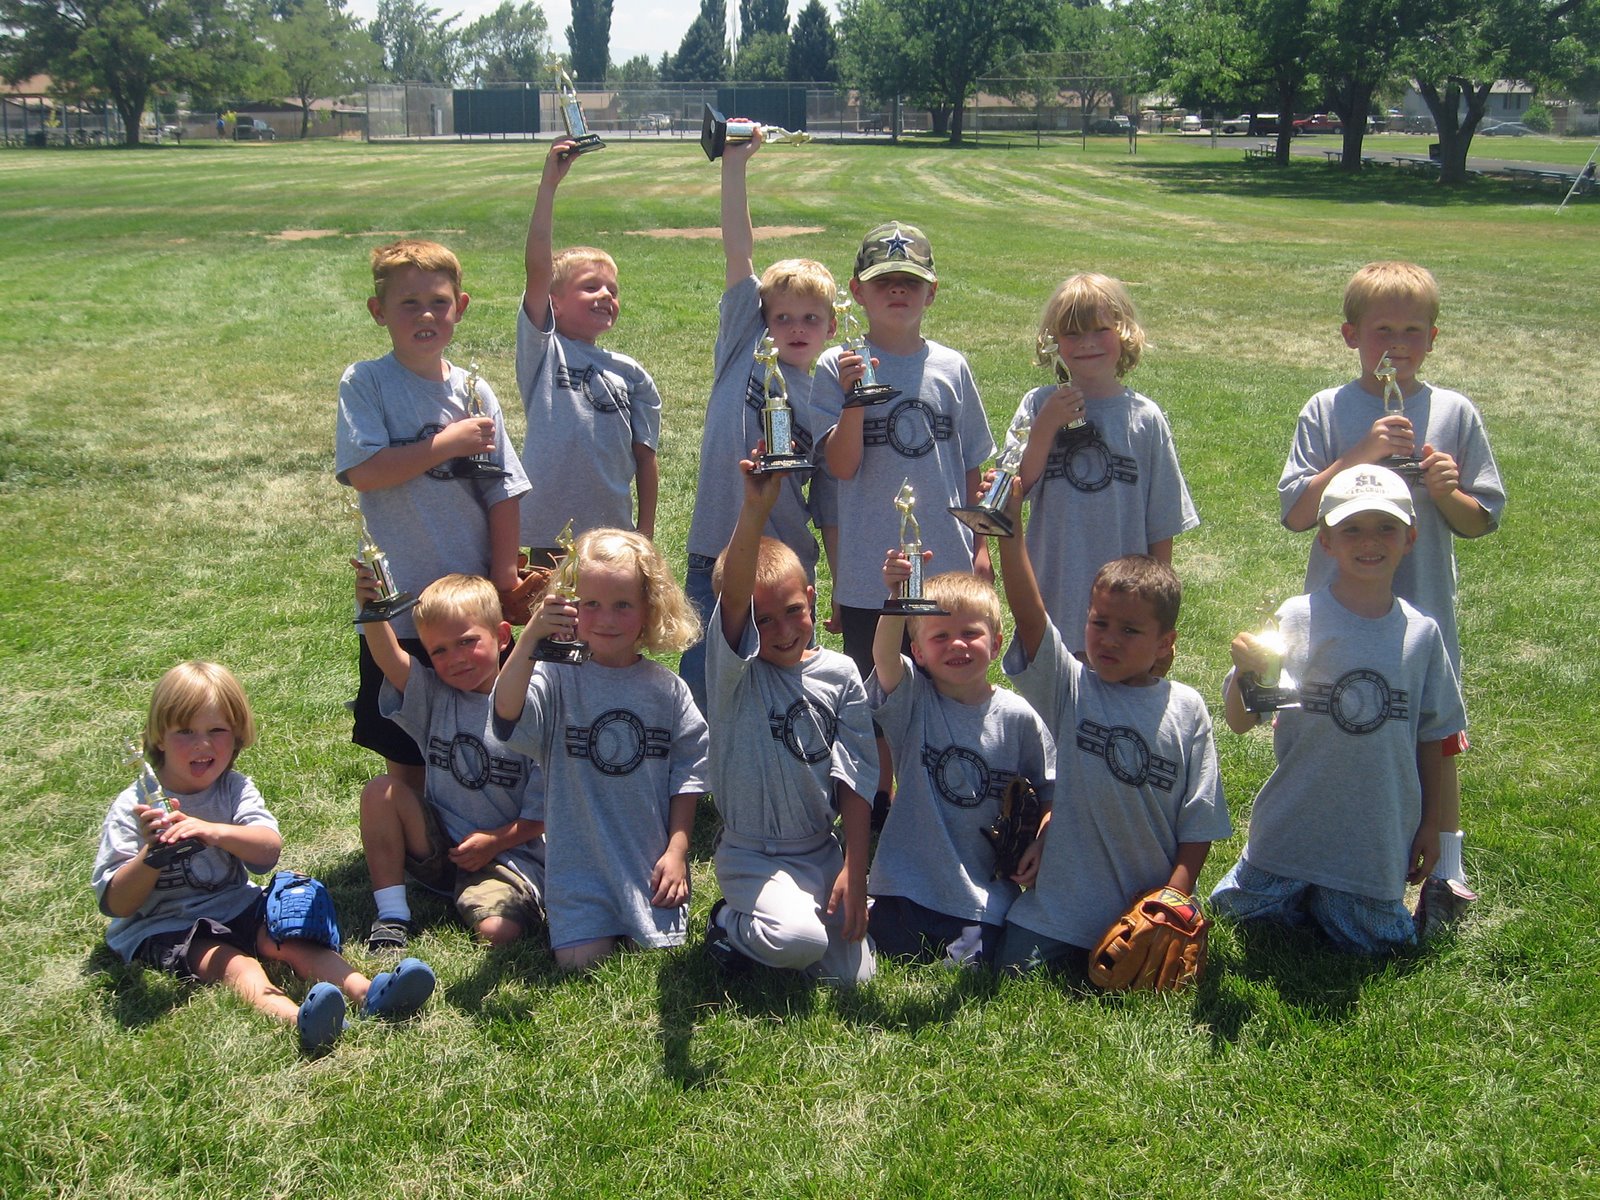 [tball+team+with+trophies.jpg]